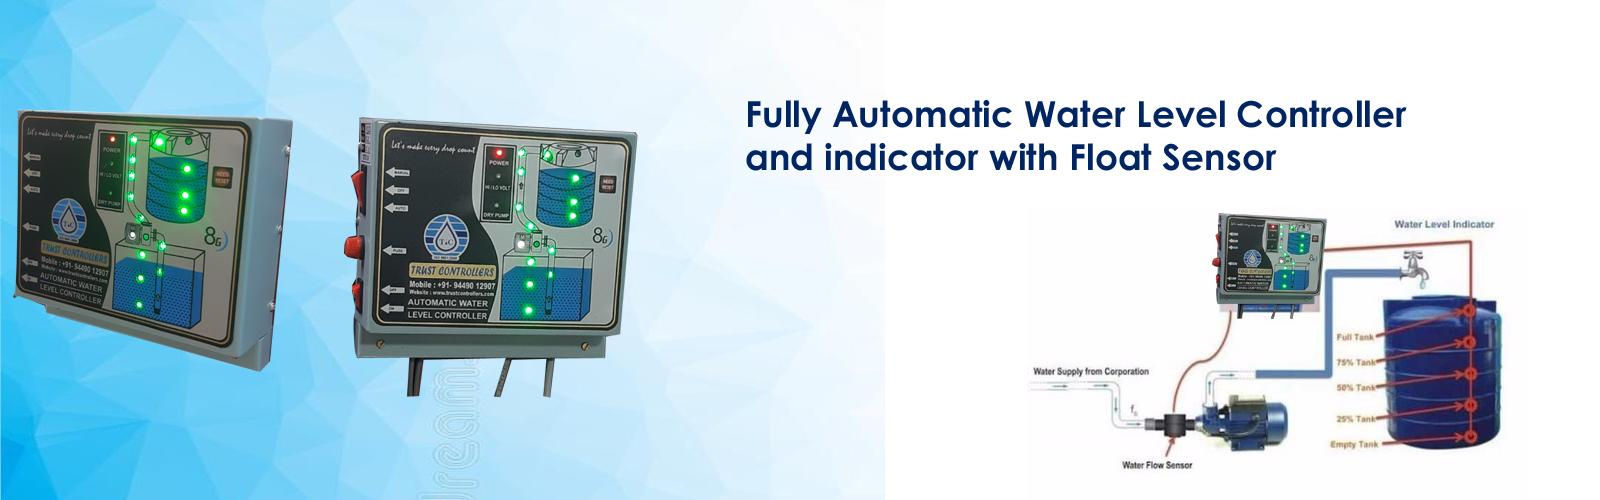 ban3 right brand of automatic water level controller,best and most reliable water level controller,automatic water level controller services in bamngalore,automatic water level controller manufacturers,wireless water level controller manufactureres in india